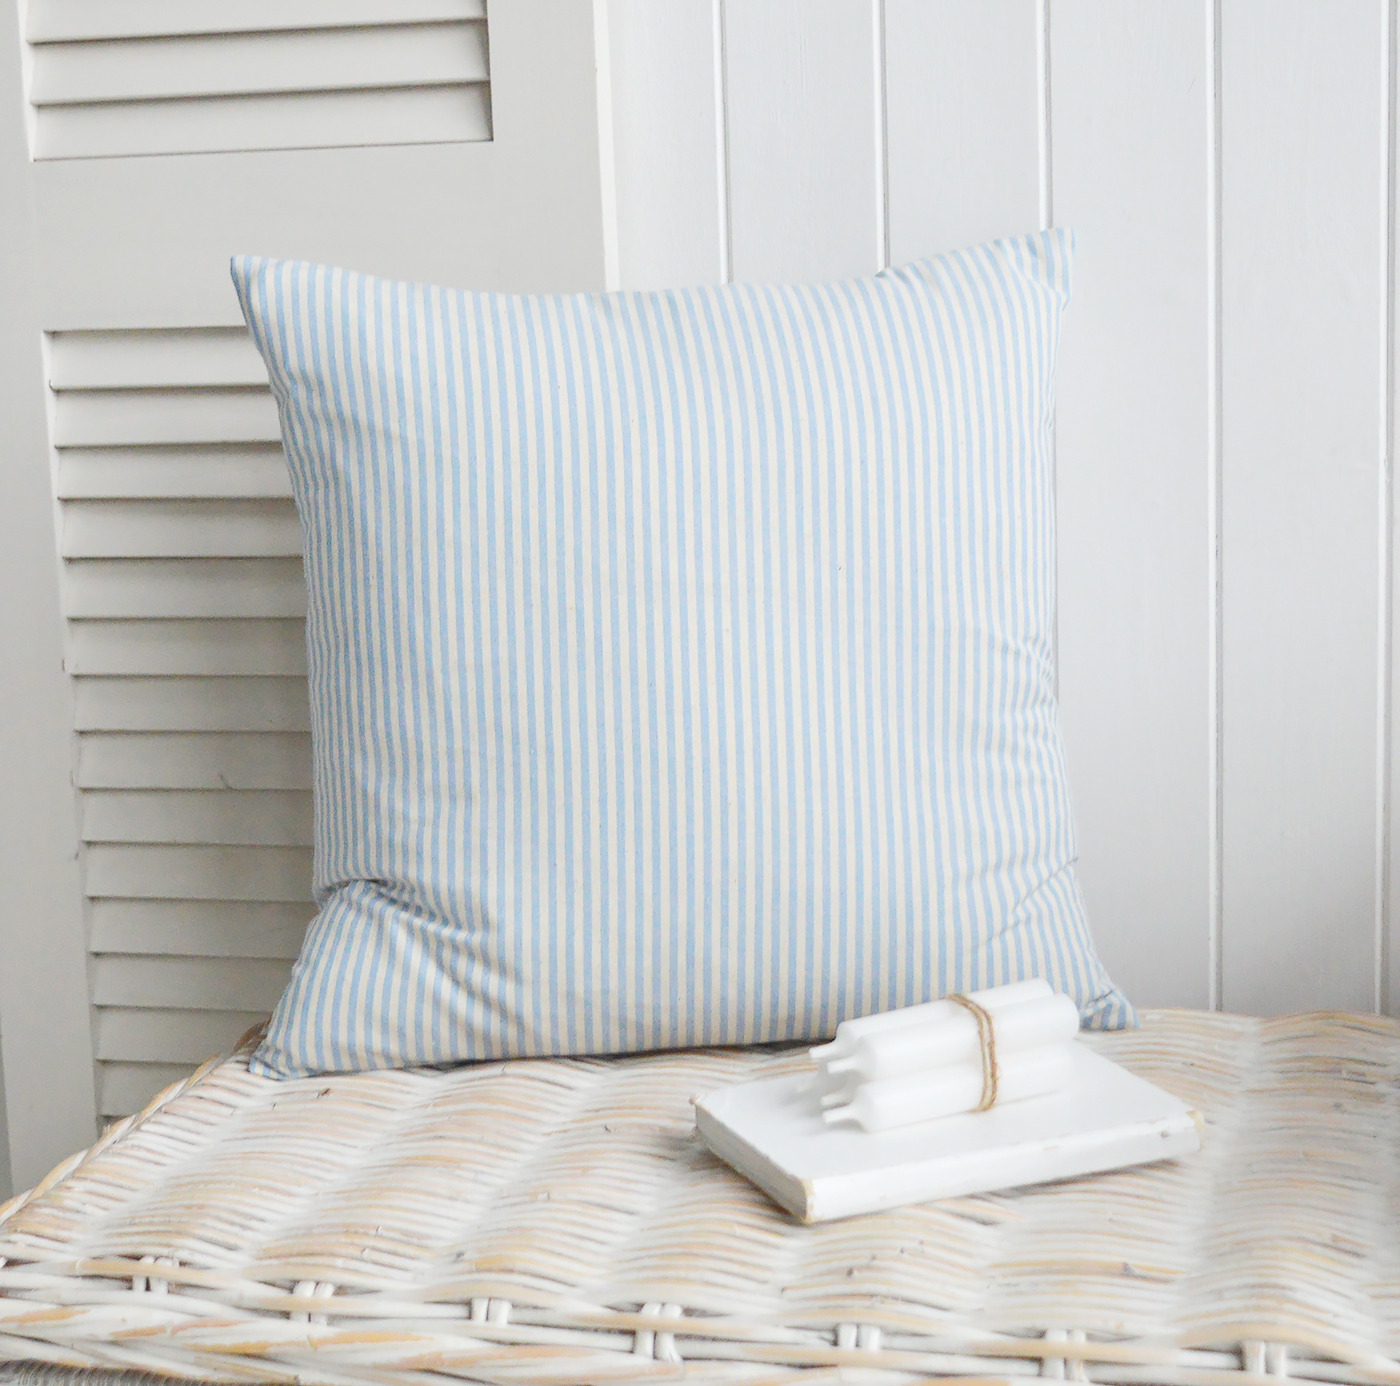 Rhode Island pale blue stripe cushion cover for a Hamptons feel to your home